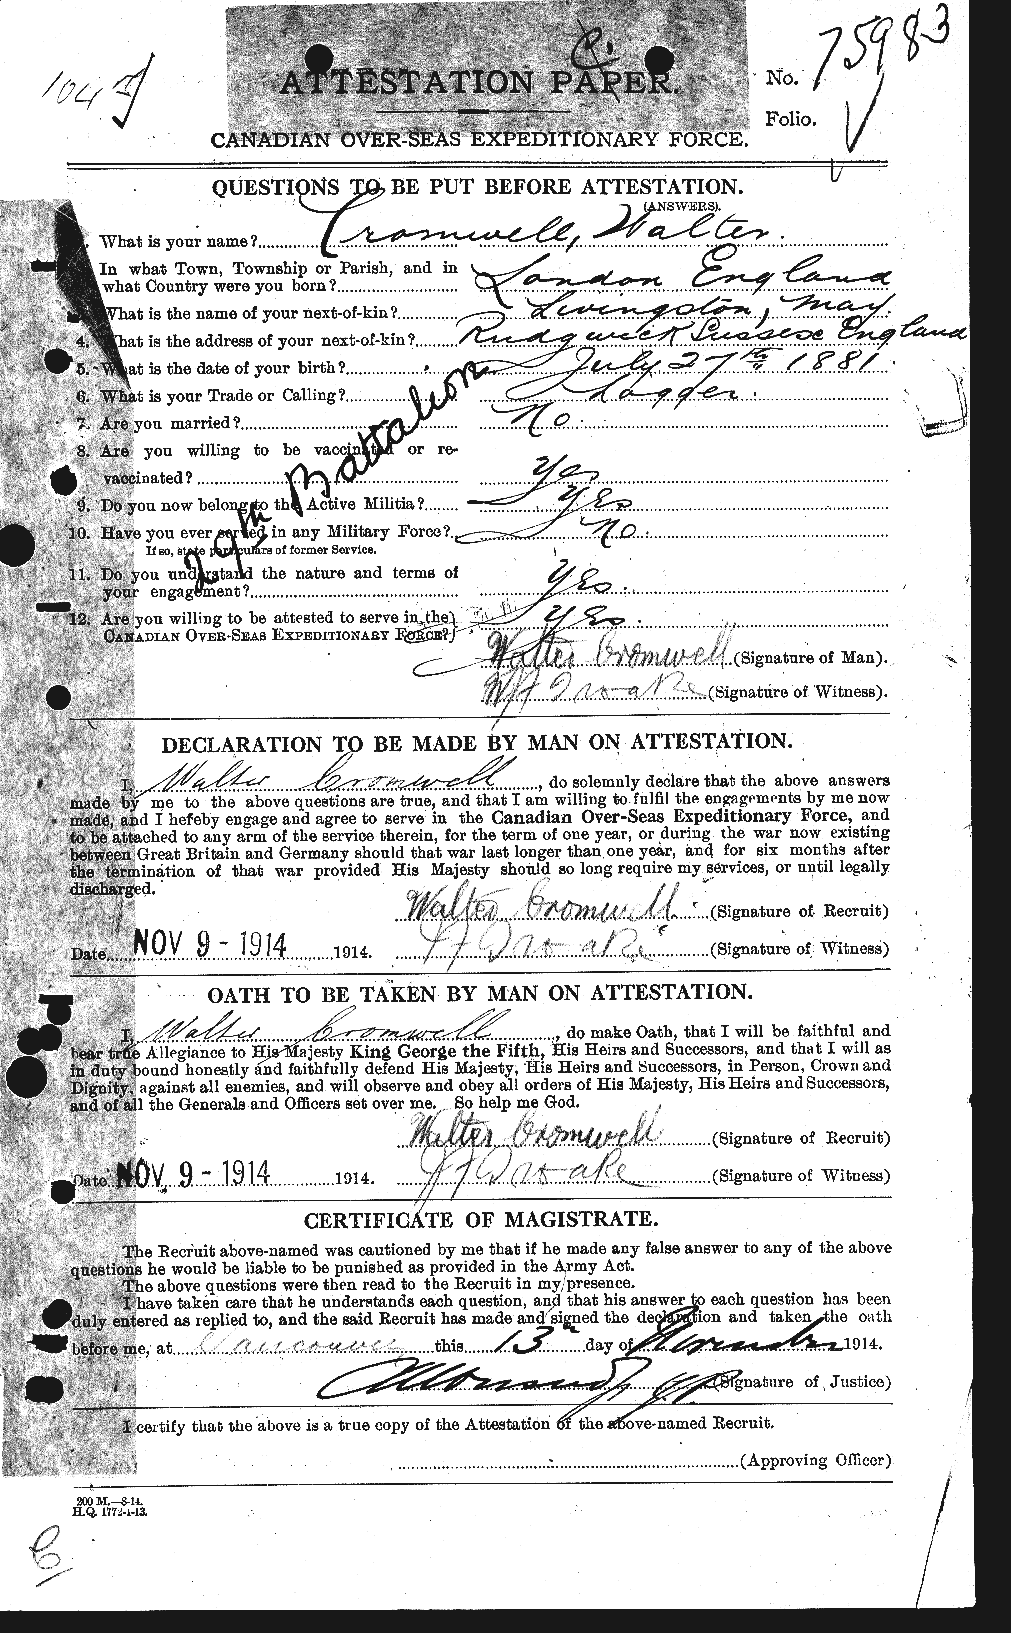 Personnel Records of the First World War - CEF 064635a